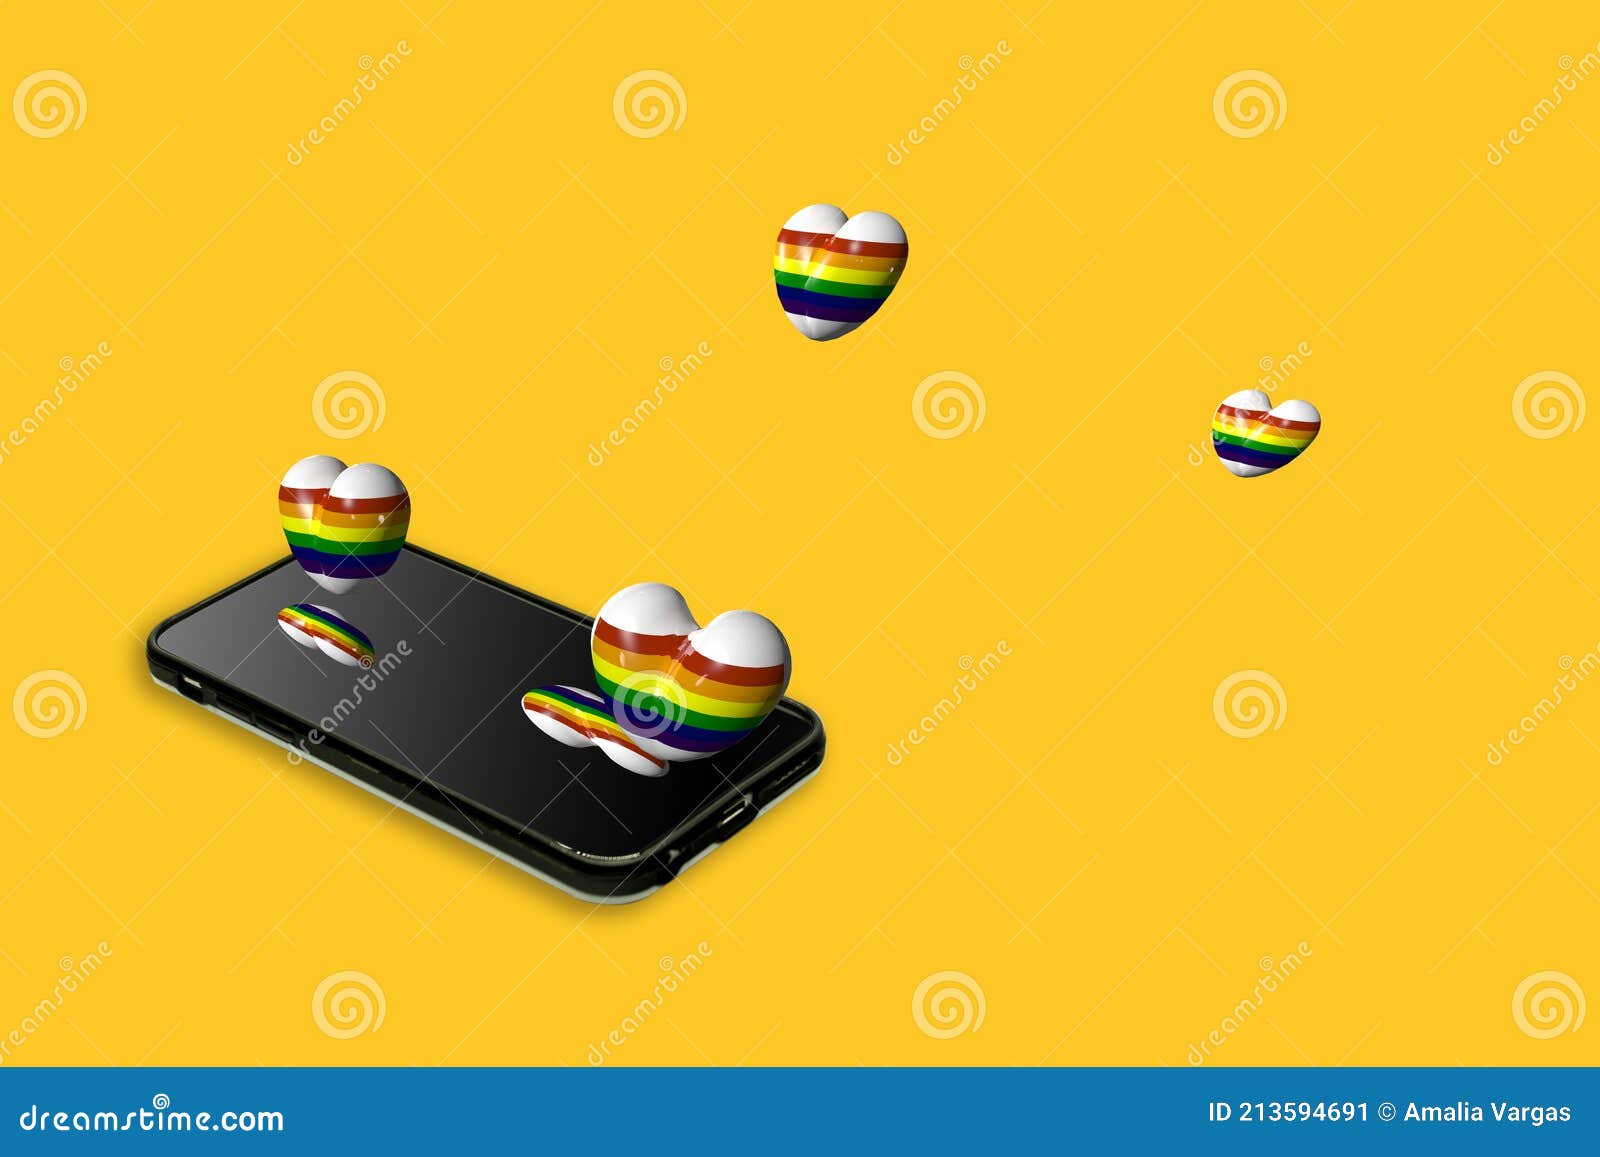 hearts covered with the lgbttiq flag floating in the air from the cell phone love and technology